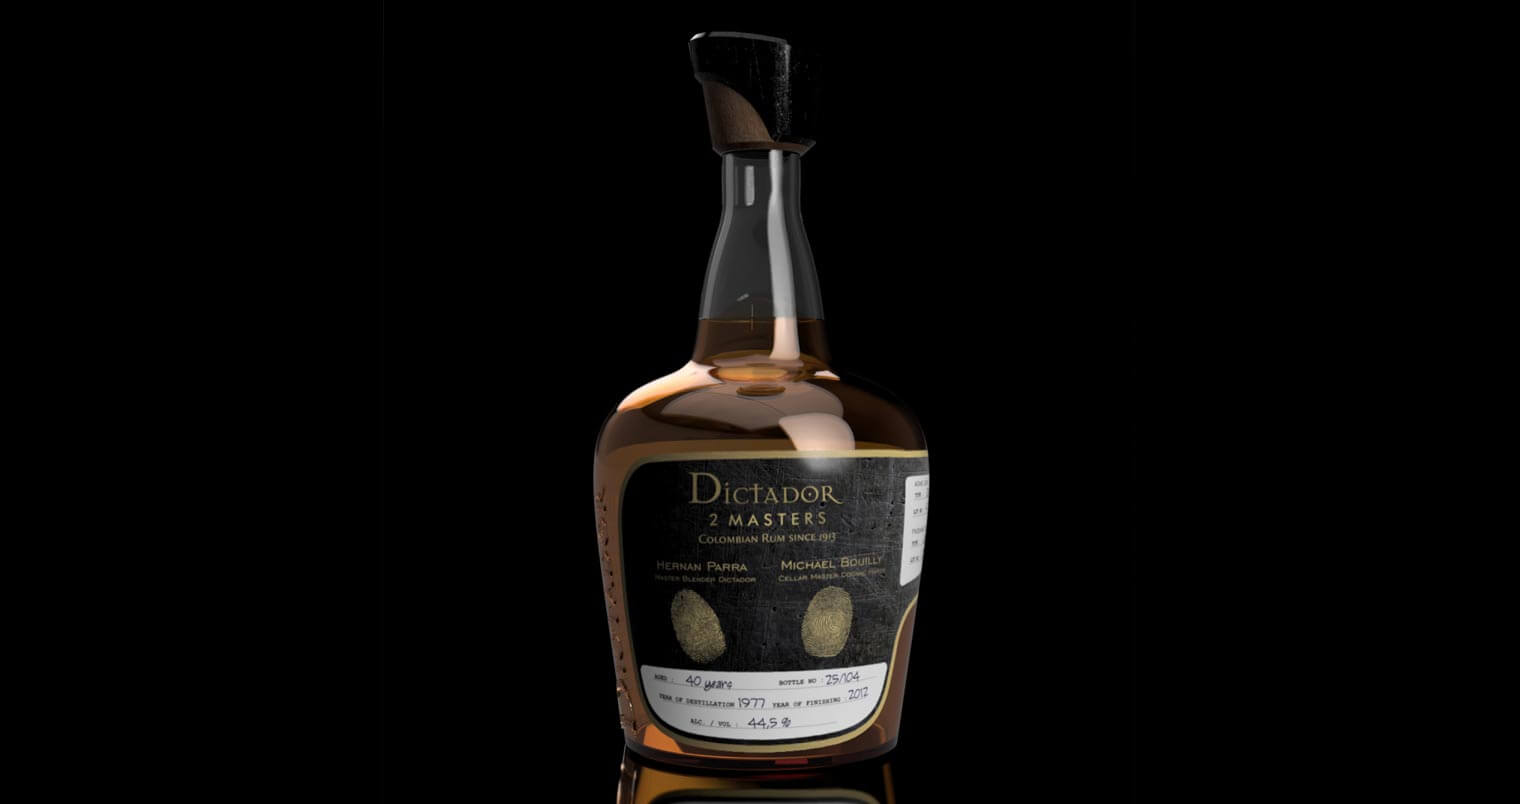 Dictador 2 Masters, bottle on black, featured image